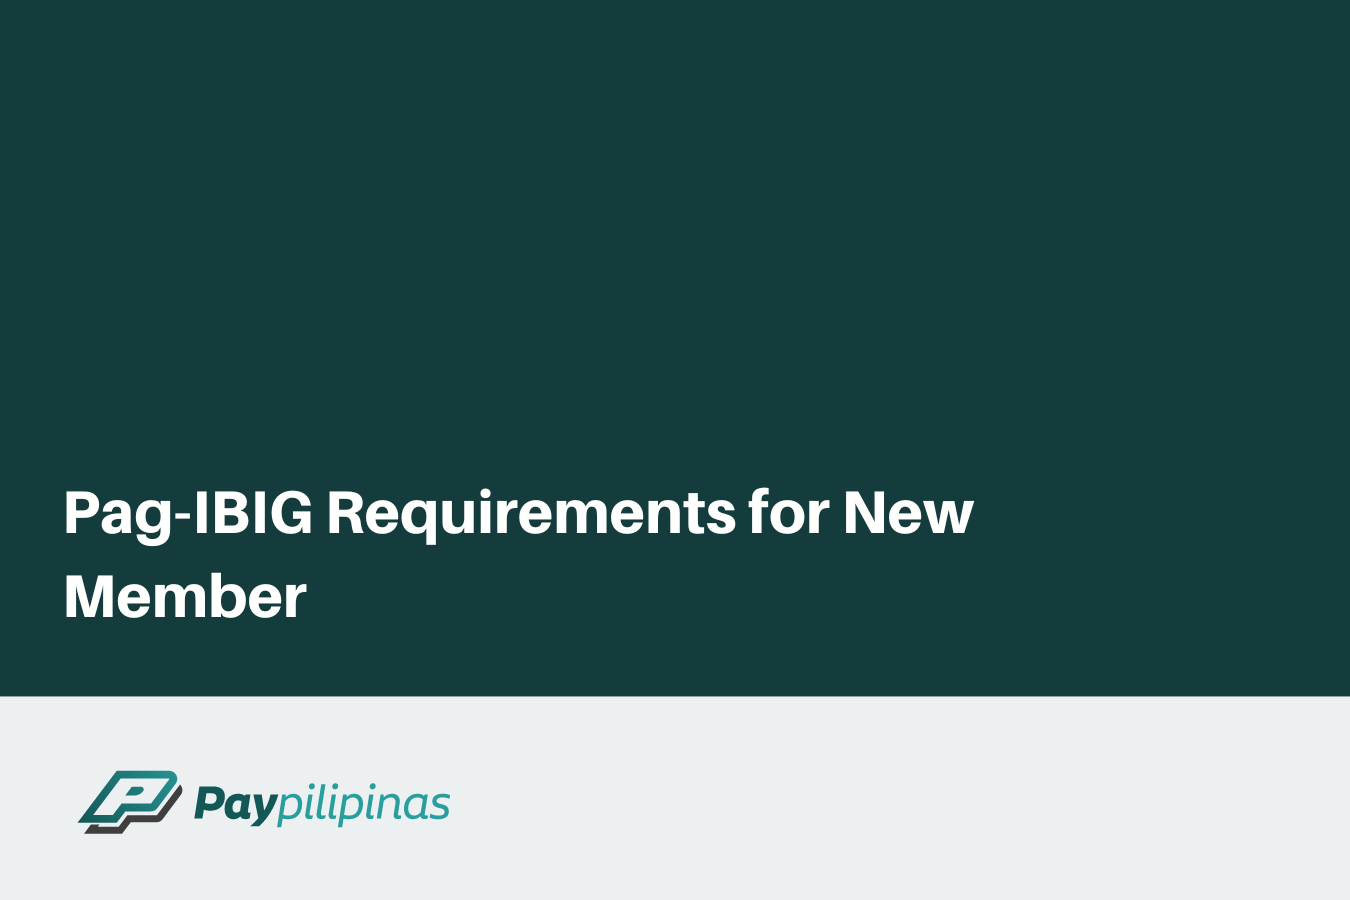 Pag-IBIG Requirements for New Member Registration and List of Benefits